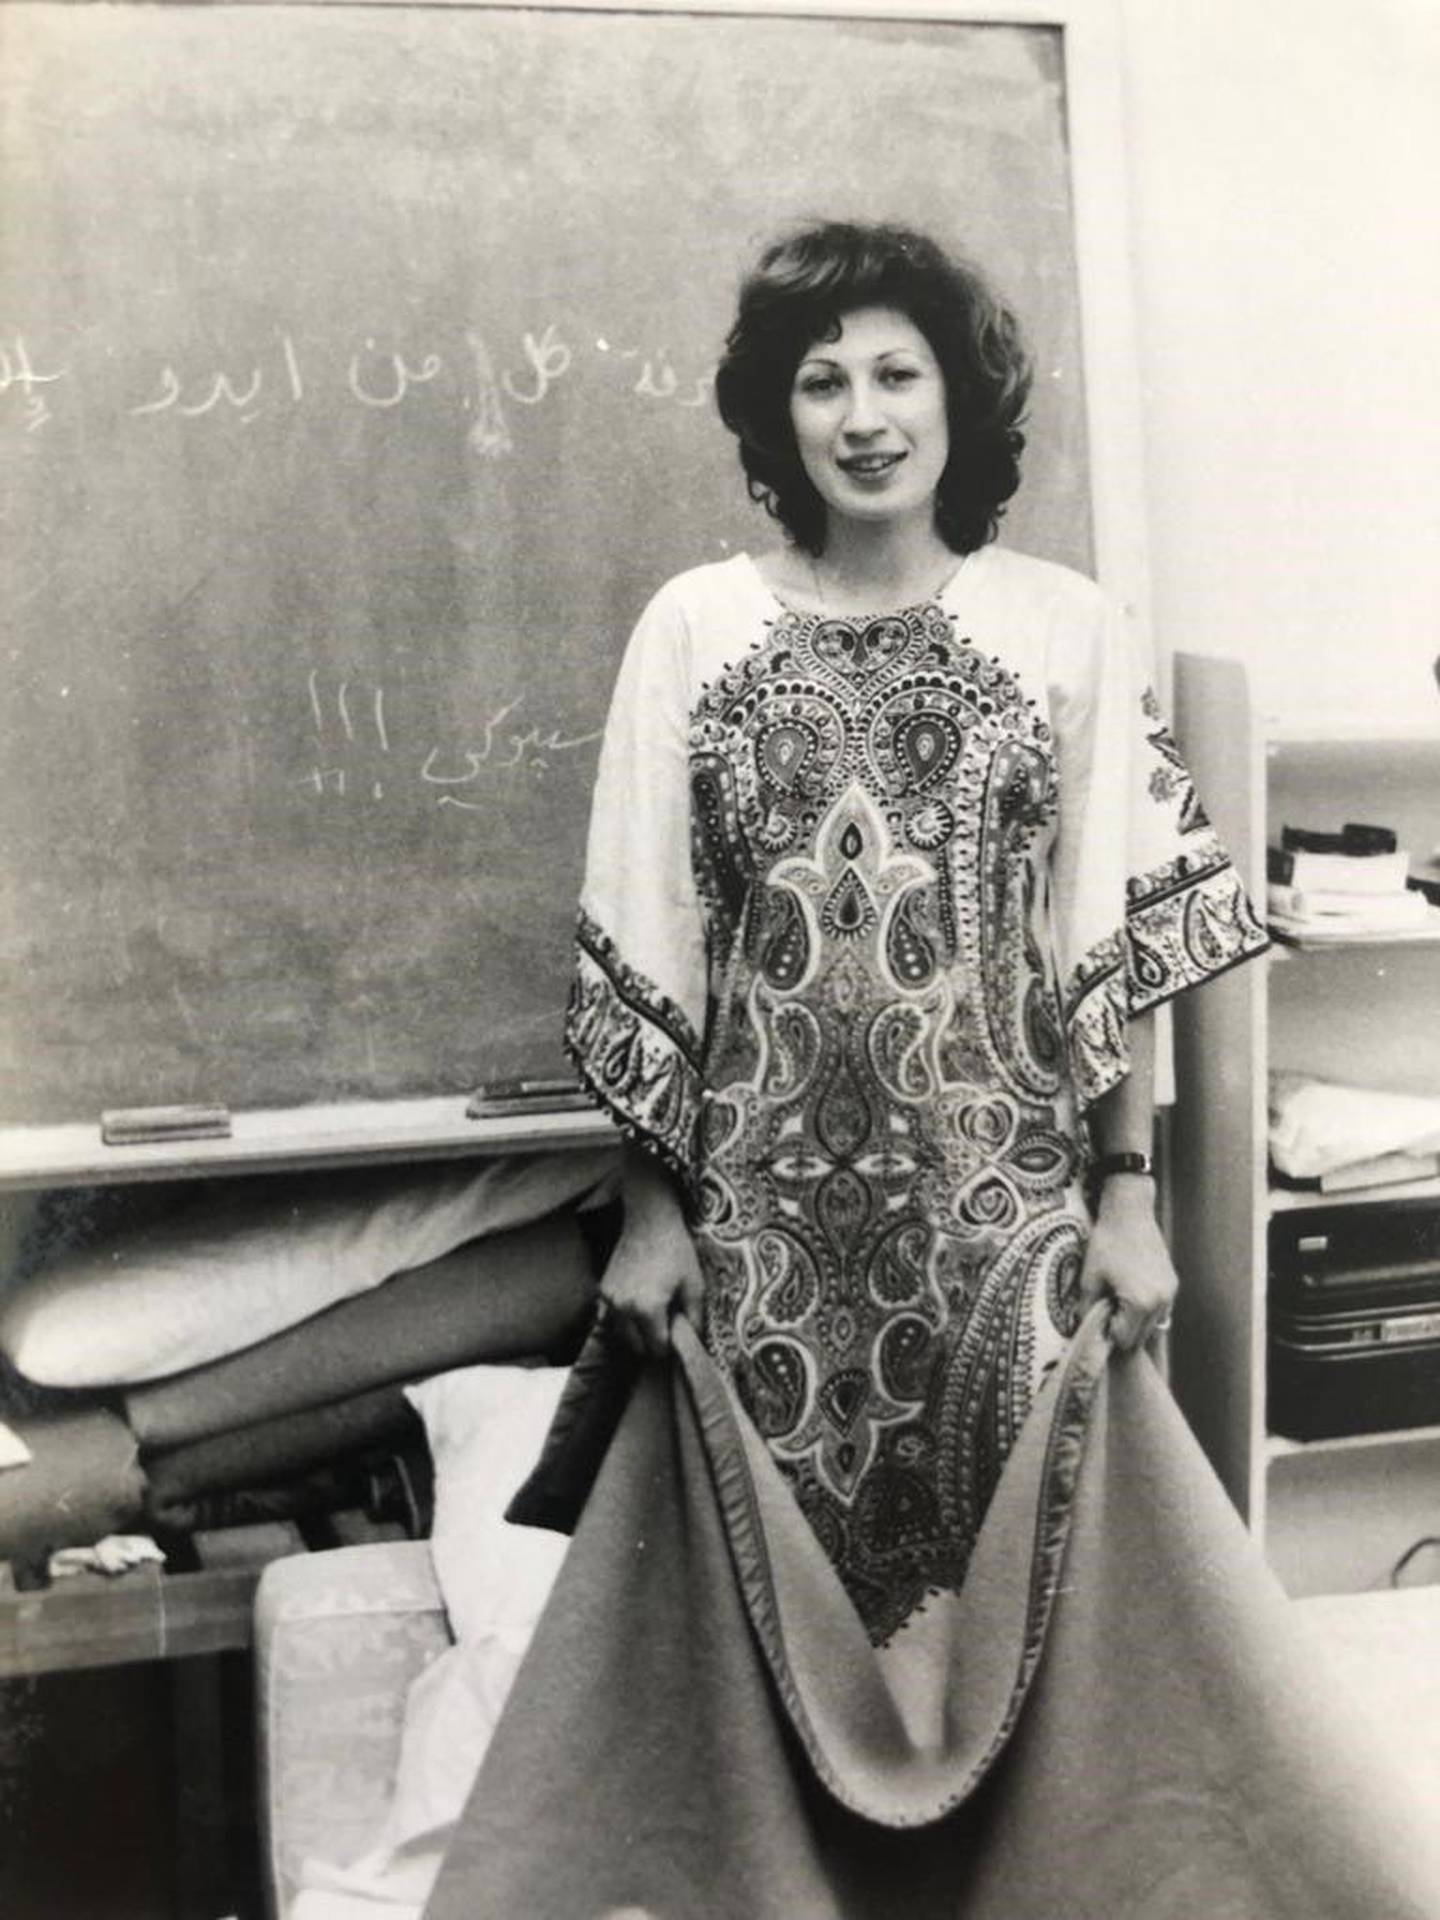 Dr Mona Nemer's student life in the basement of the AUB medical building in July 1976, just before she left Lebanon.